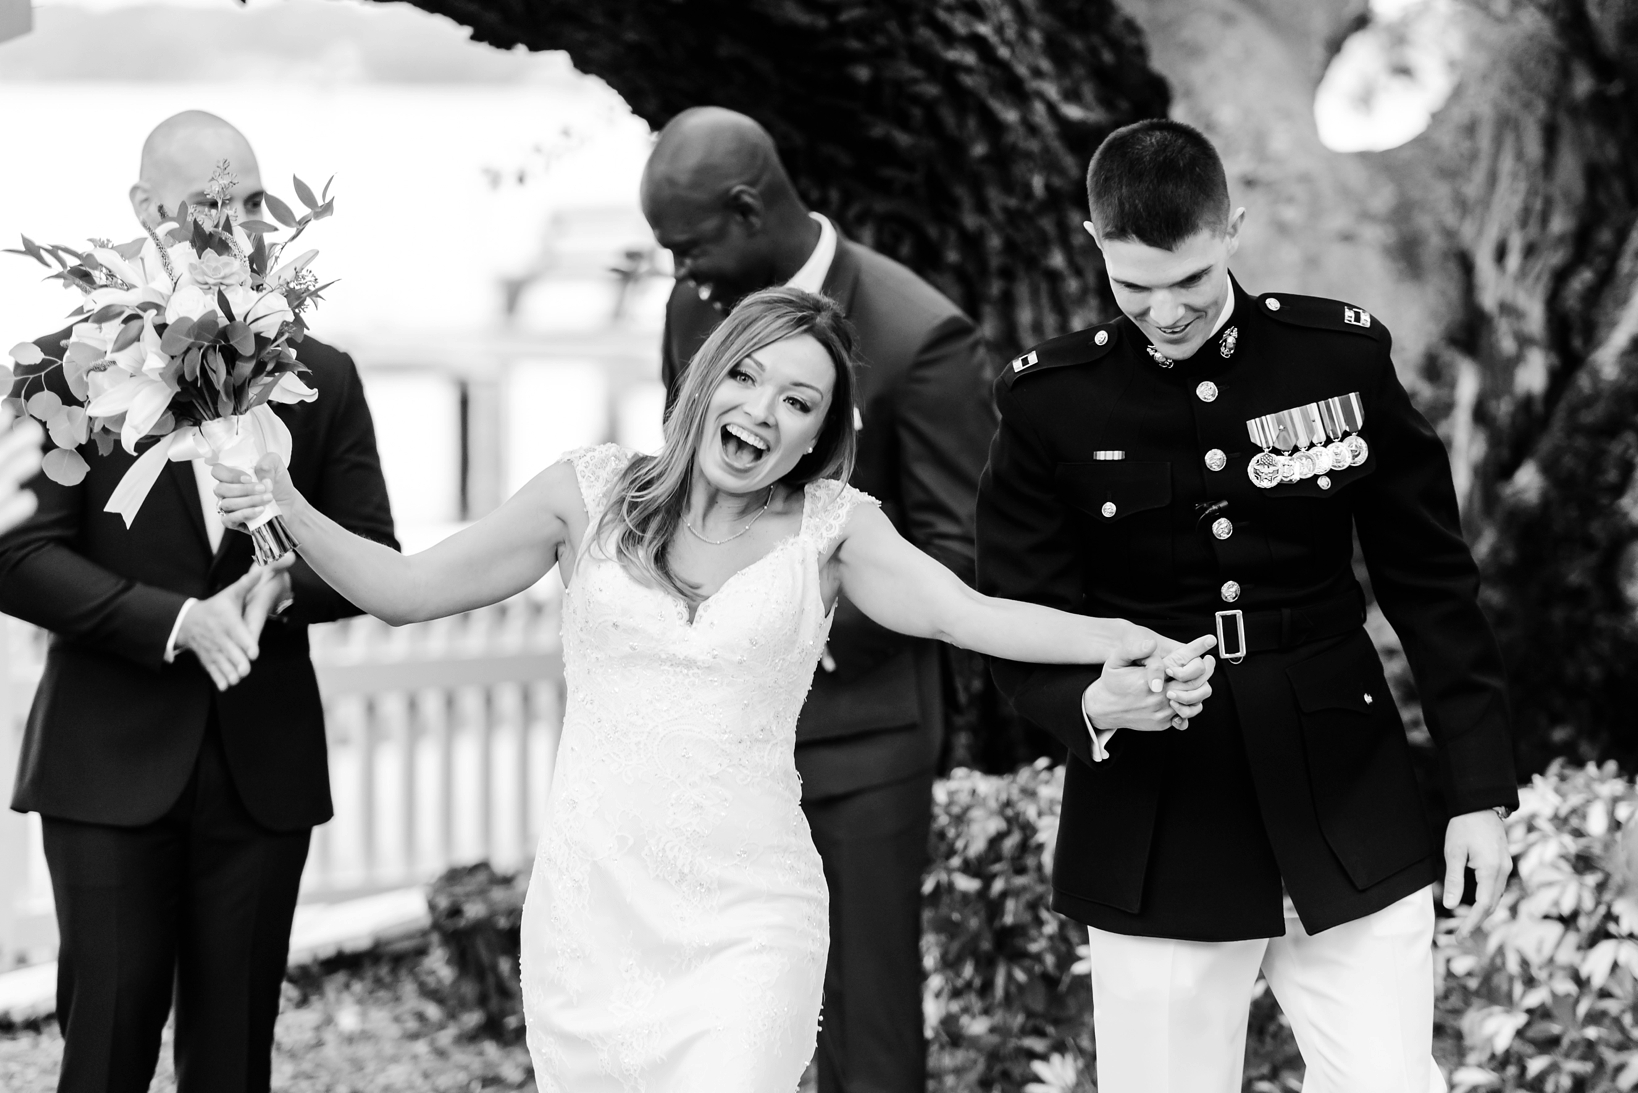 Bride celebrating as she walks back up the aisle with her new husband